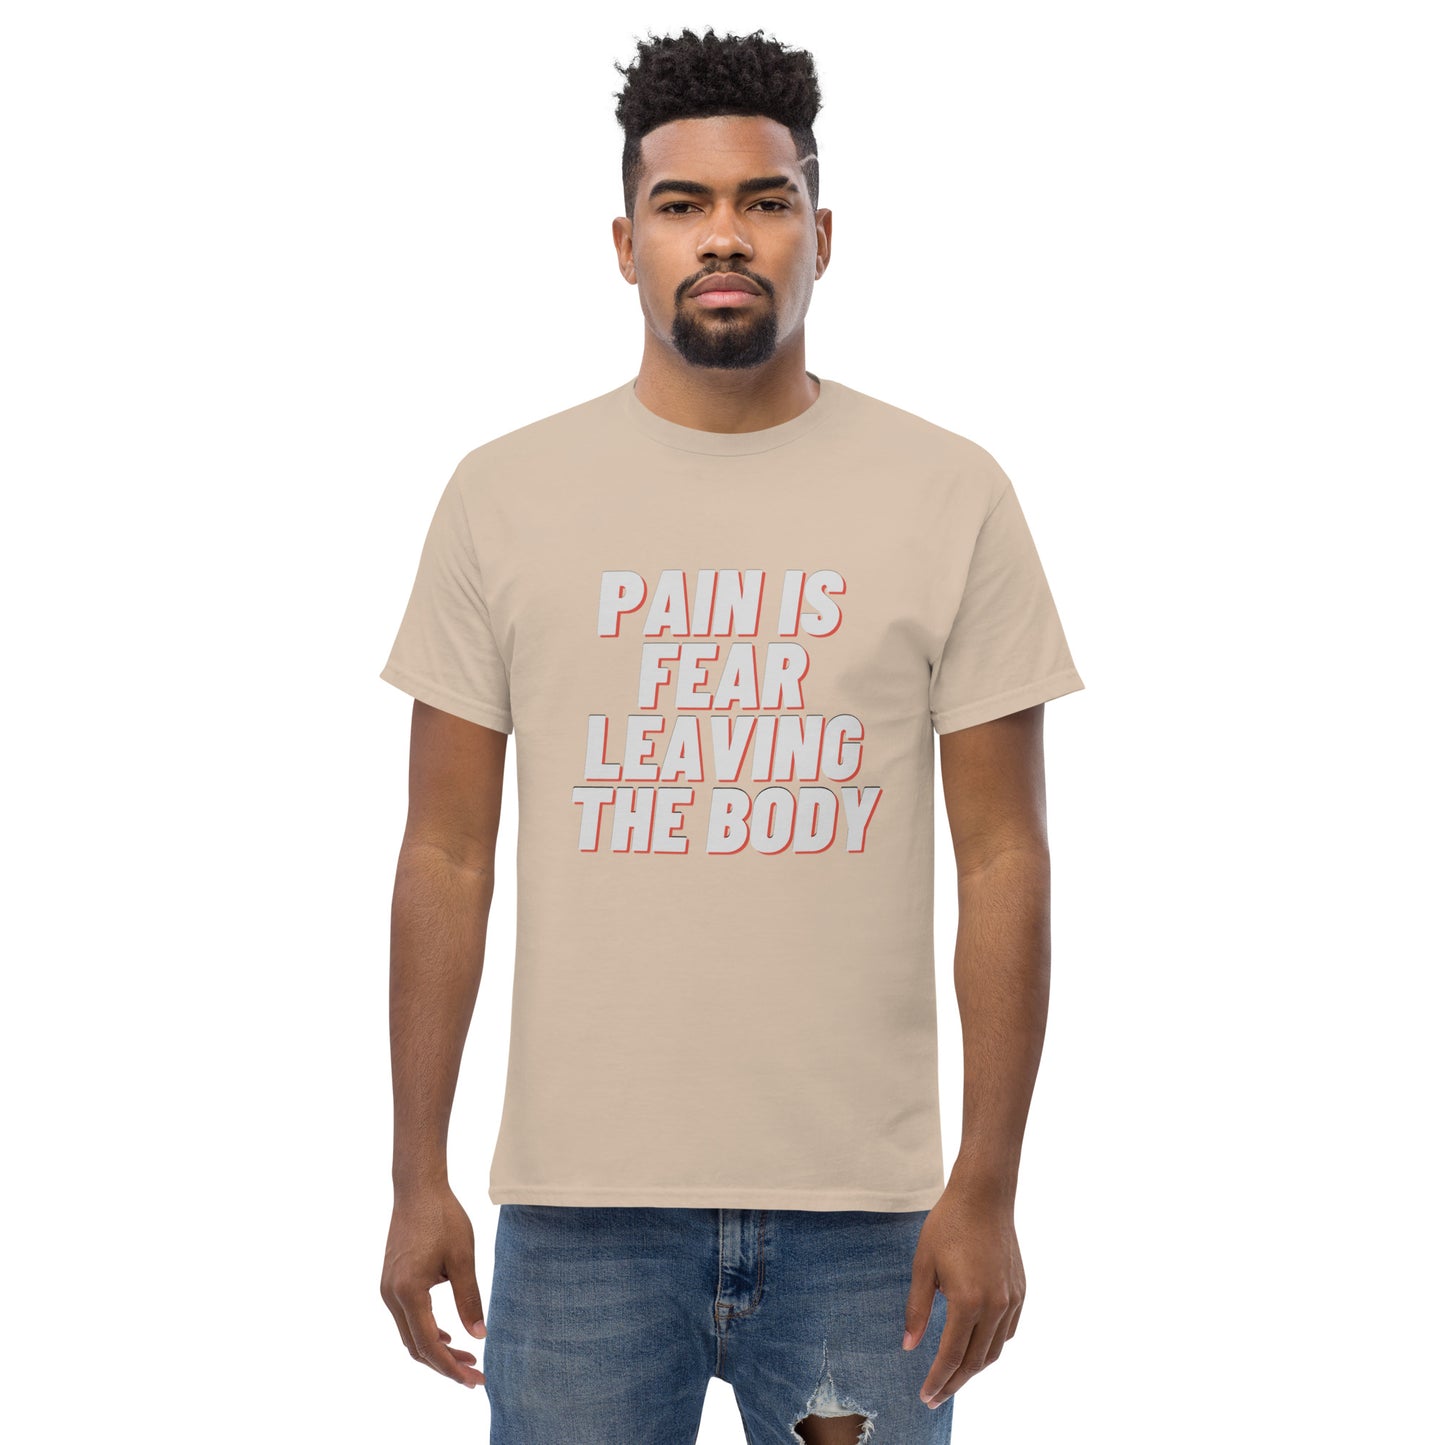 Pain Is Fear Leaving the Body T-Shirt and That's BS!